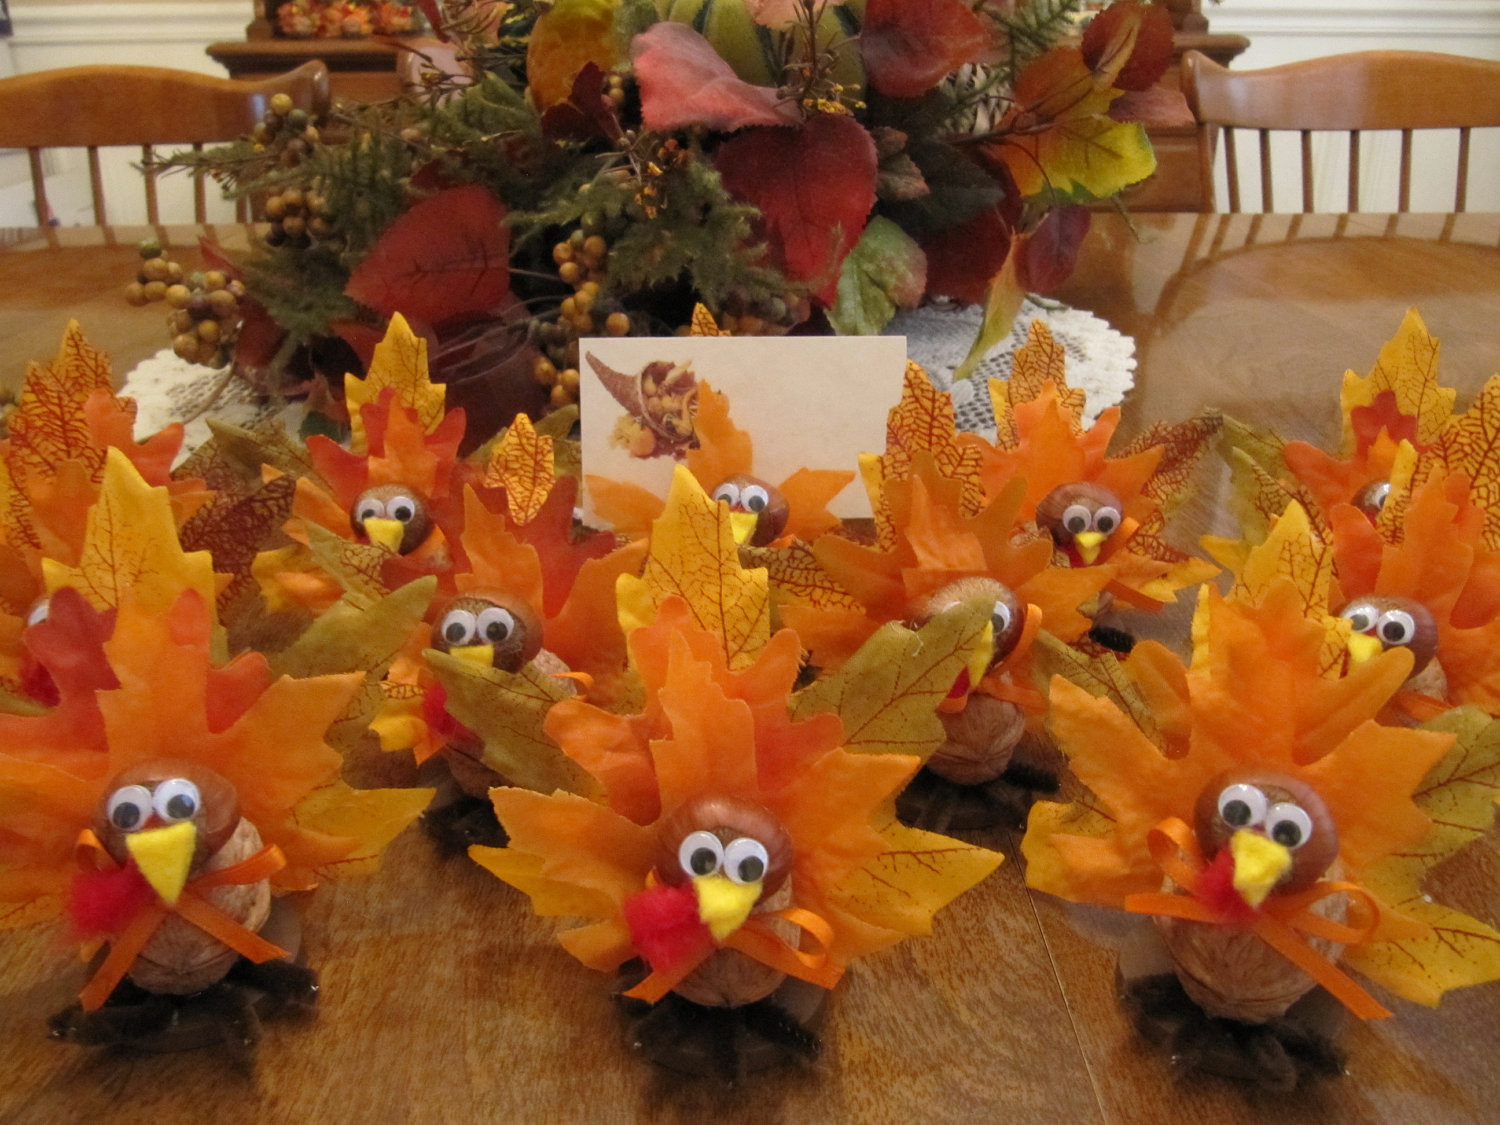 Thanksgiving Table Decorations Pinterest
 Thanksgiving Table Ideas That Are Fun For The Whole Family